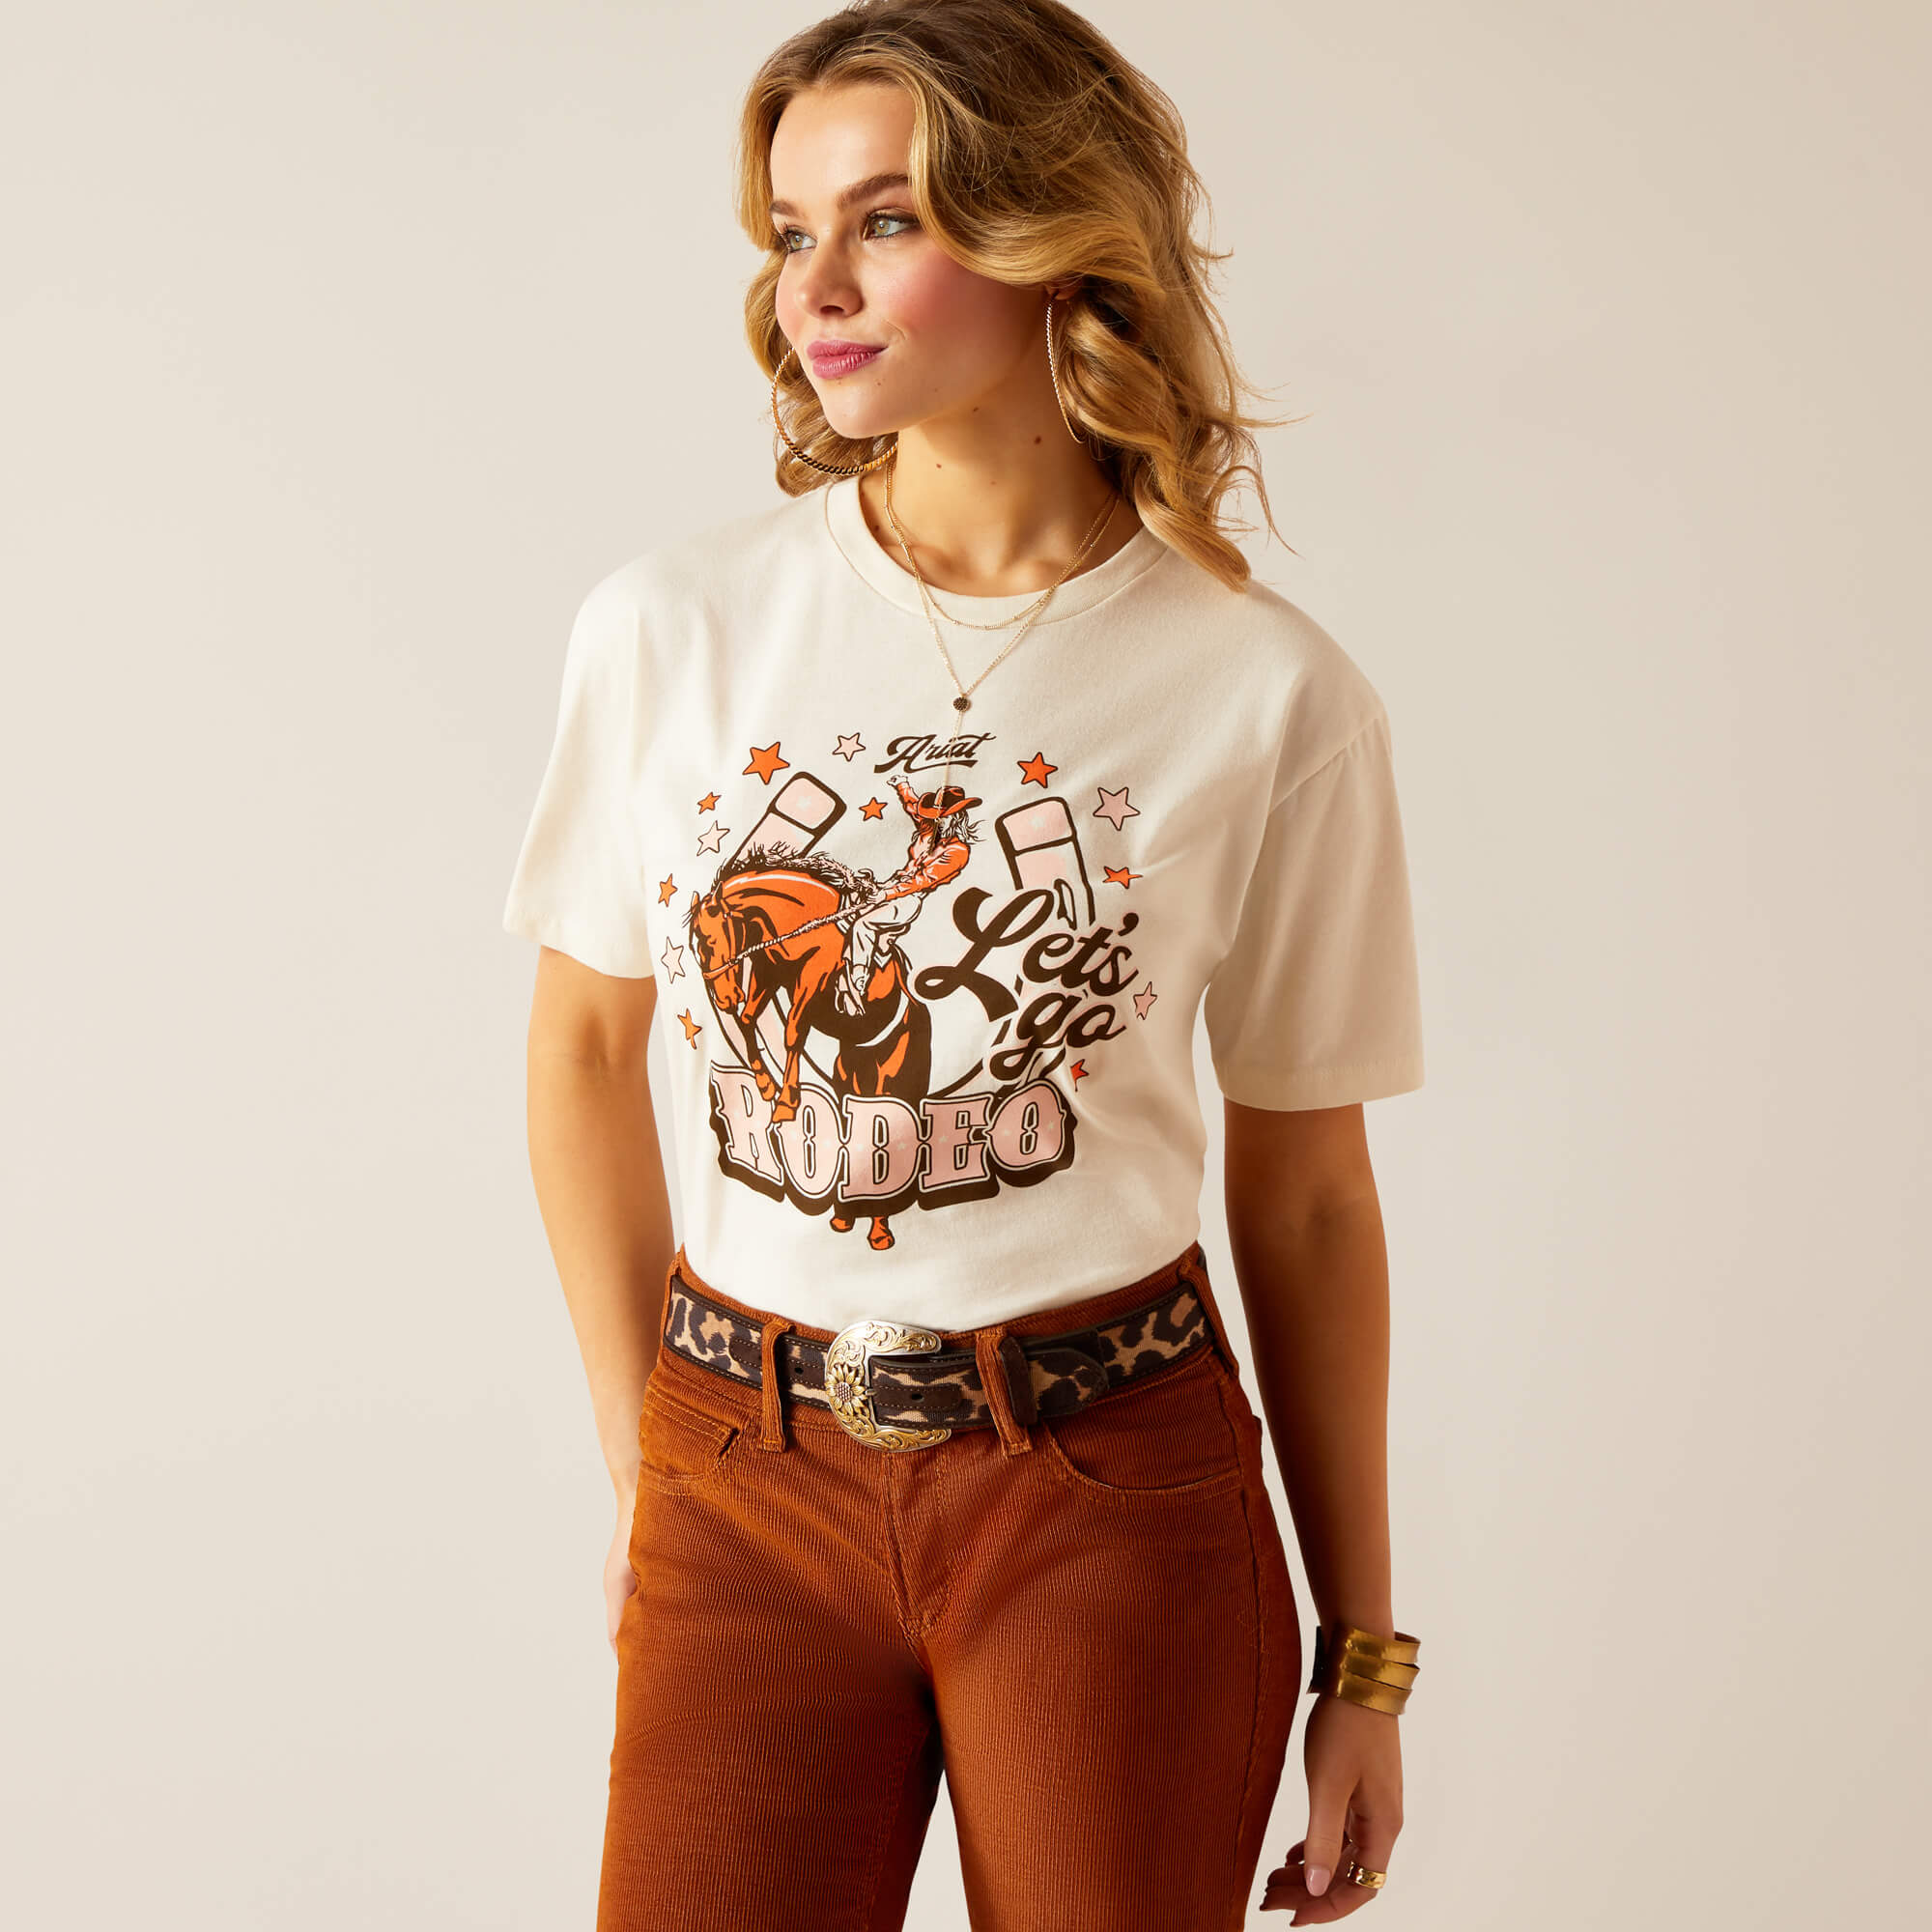 Ariat Womens Lets Rodeo Short Sleeve T-Shirt (Off White)